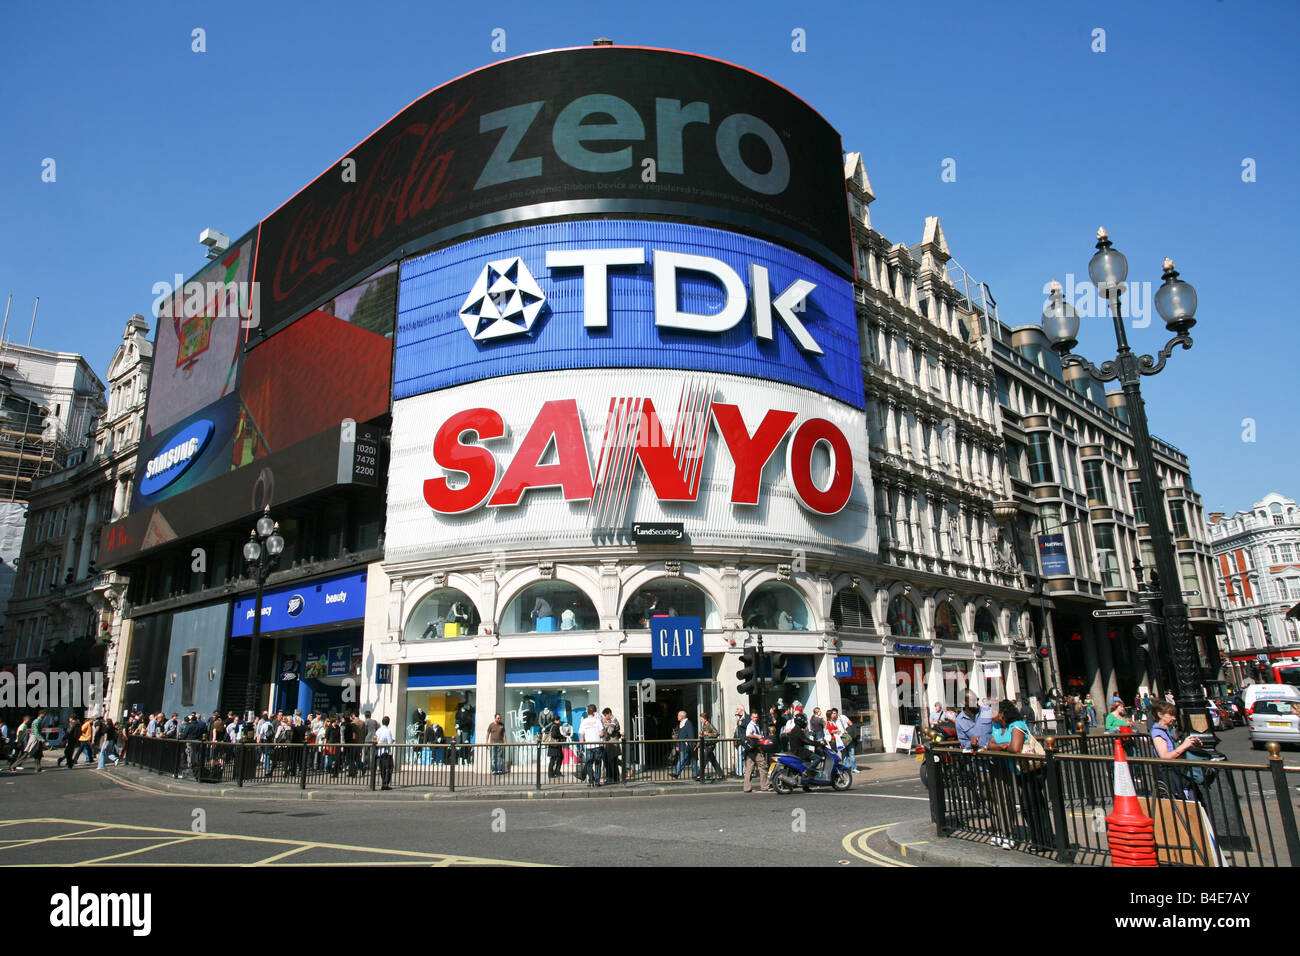 Tourists crowd streets around Piccadilly Circus famous sightseeing landmark area of London England capital city UK Stock Photo